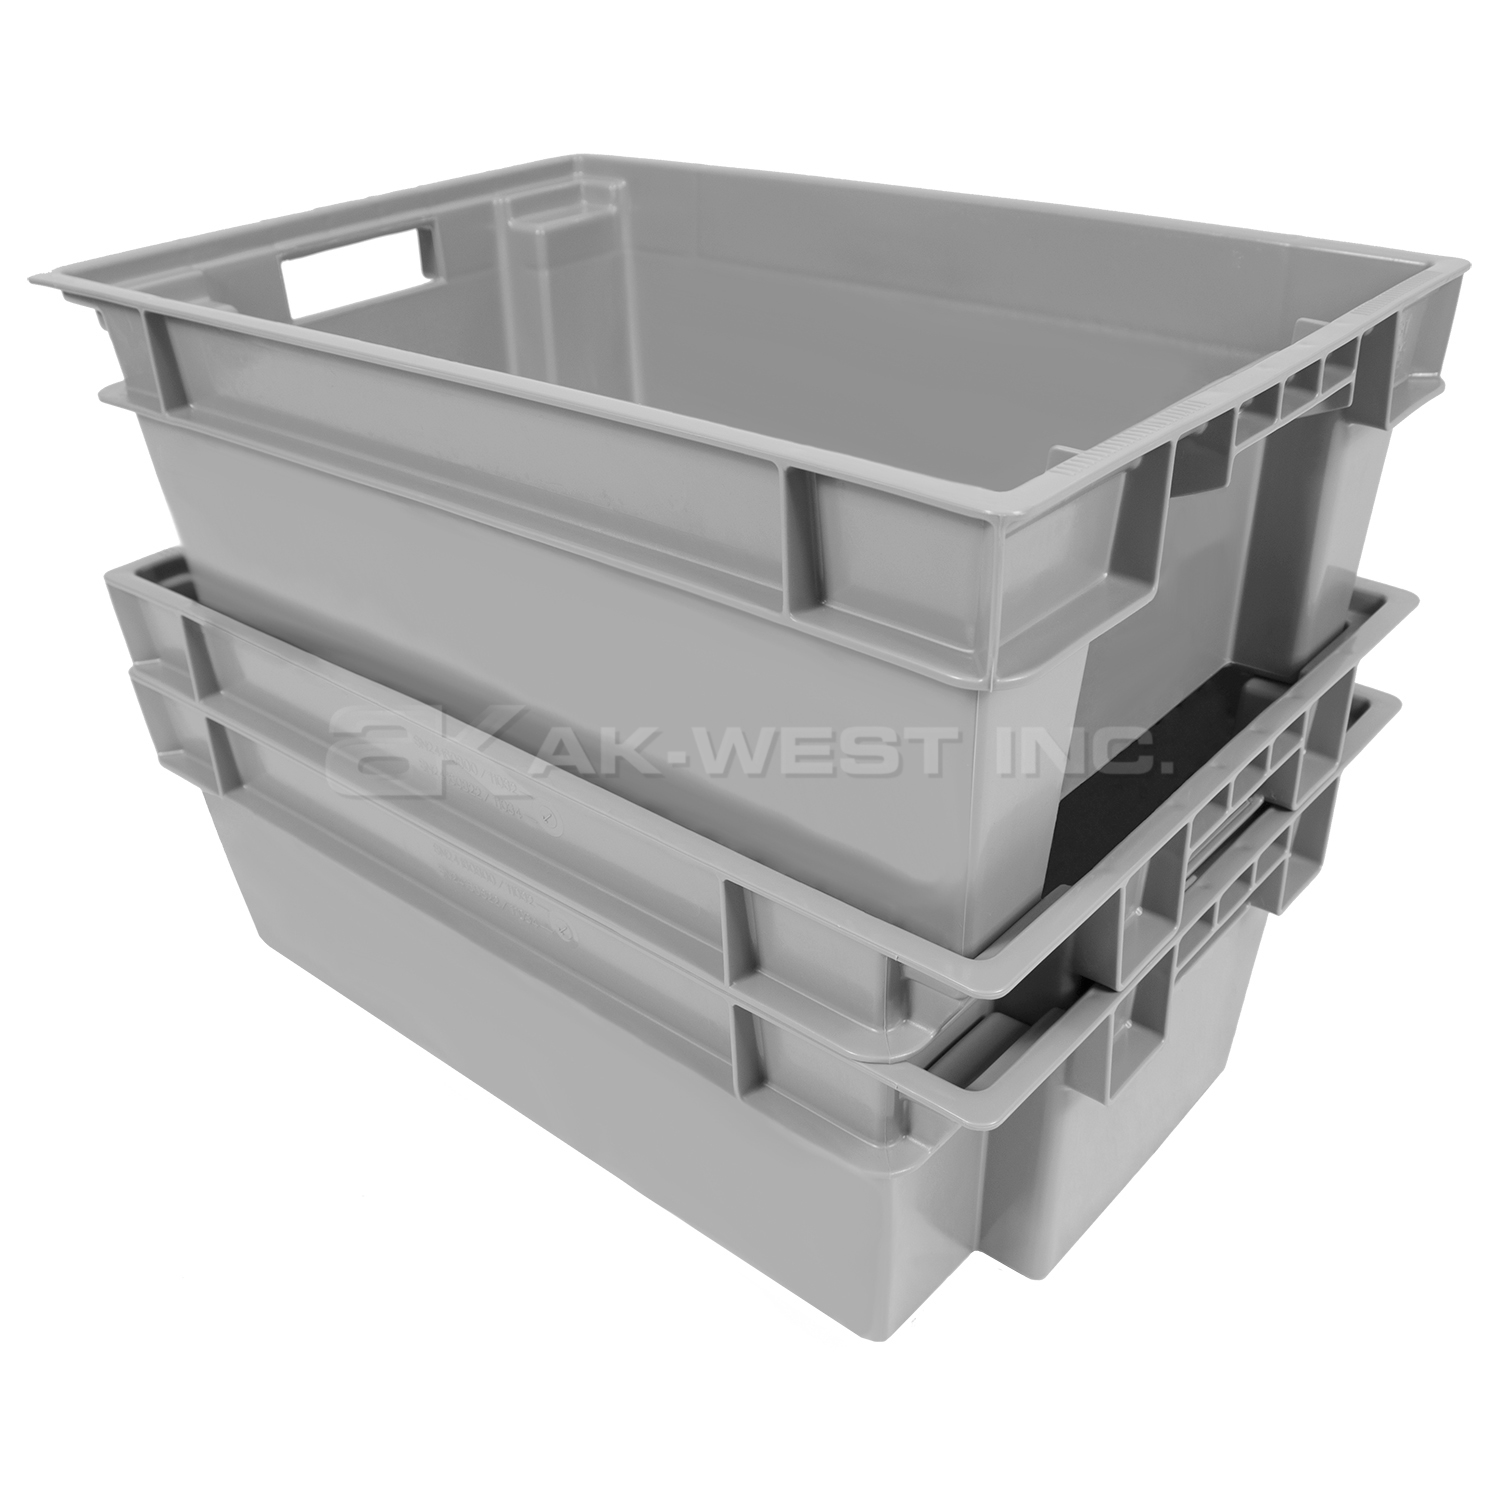 Grey, 24" x 16" x 8", Solid Stack and Nest Container, (Alt. M/N: AC11032